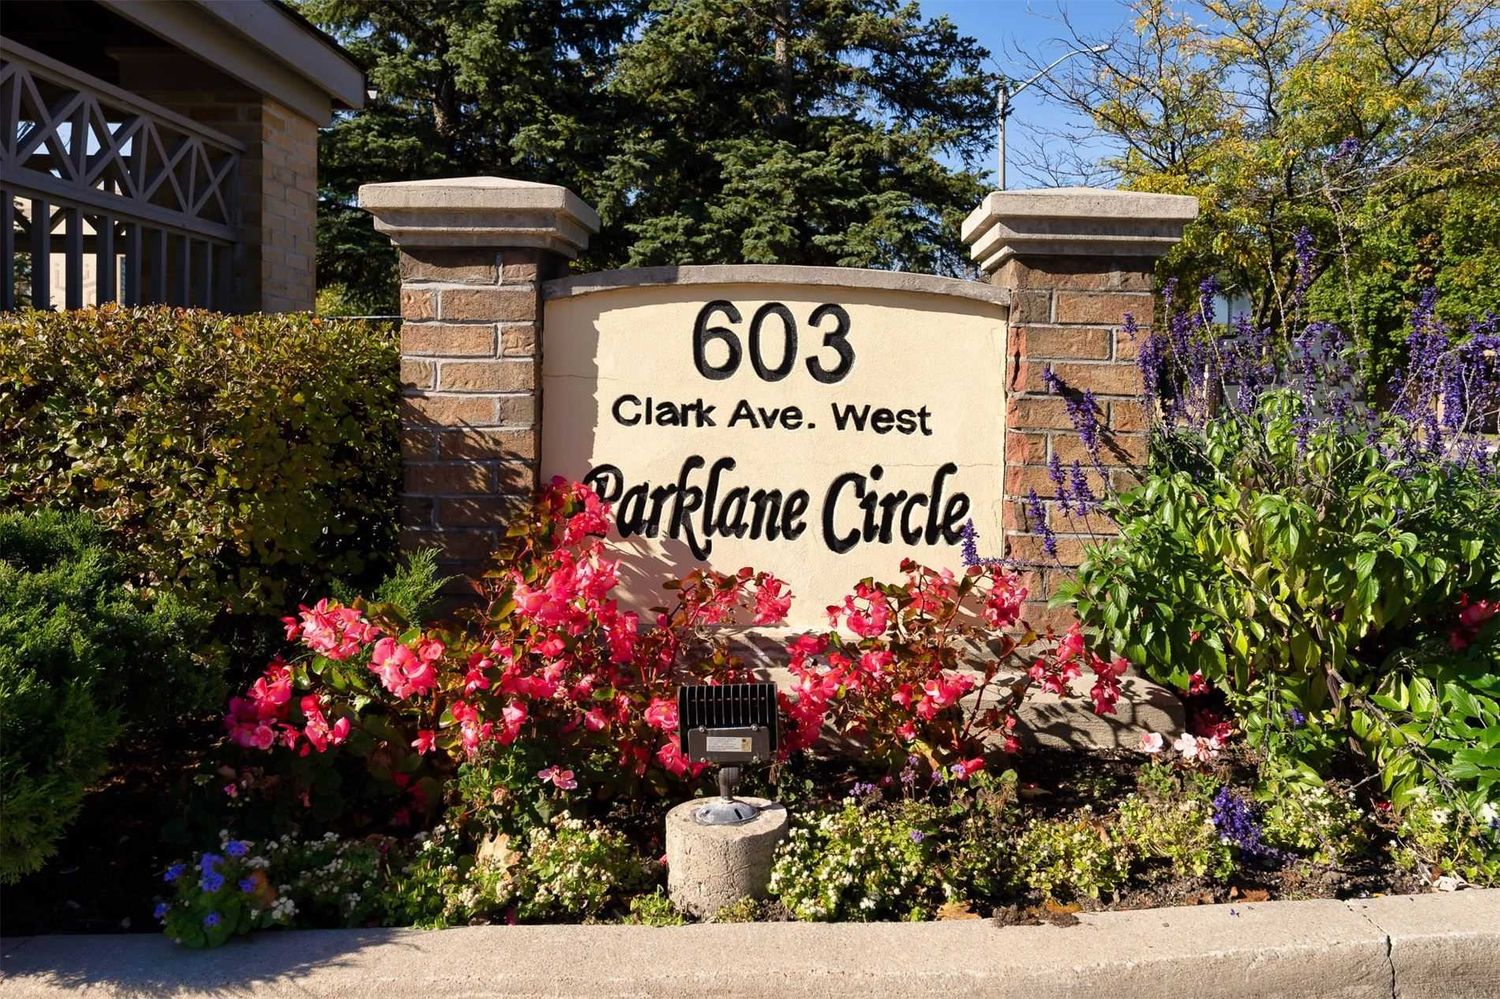 603 Clark Avenue W. Parklane Circle is located in  Vaughan, Toronto - image #3 of 3